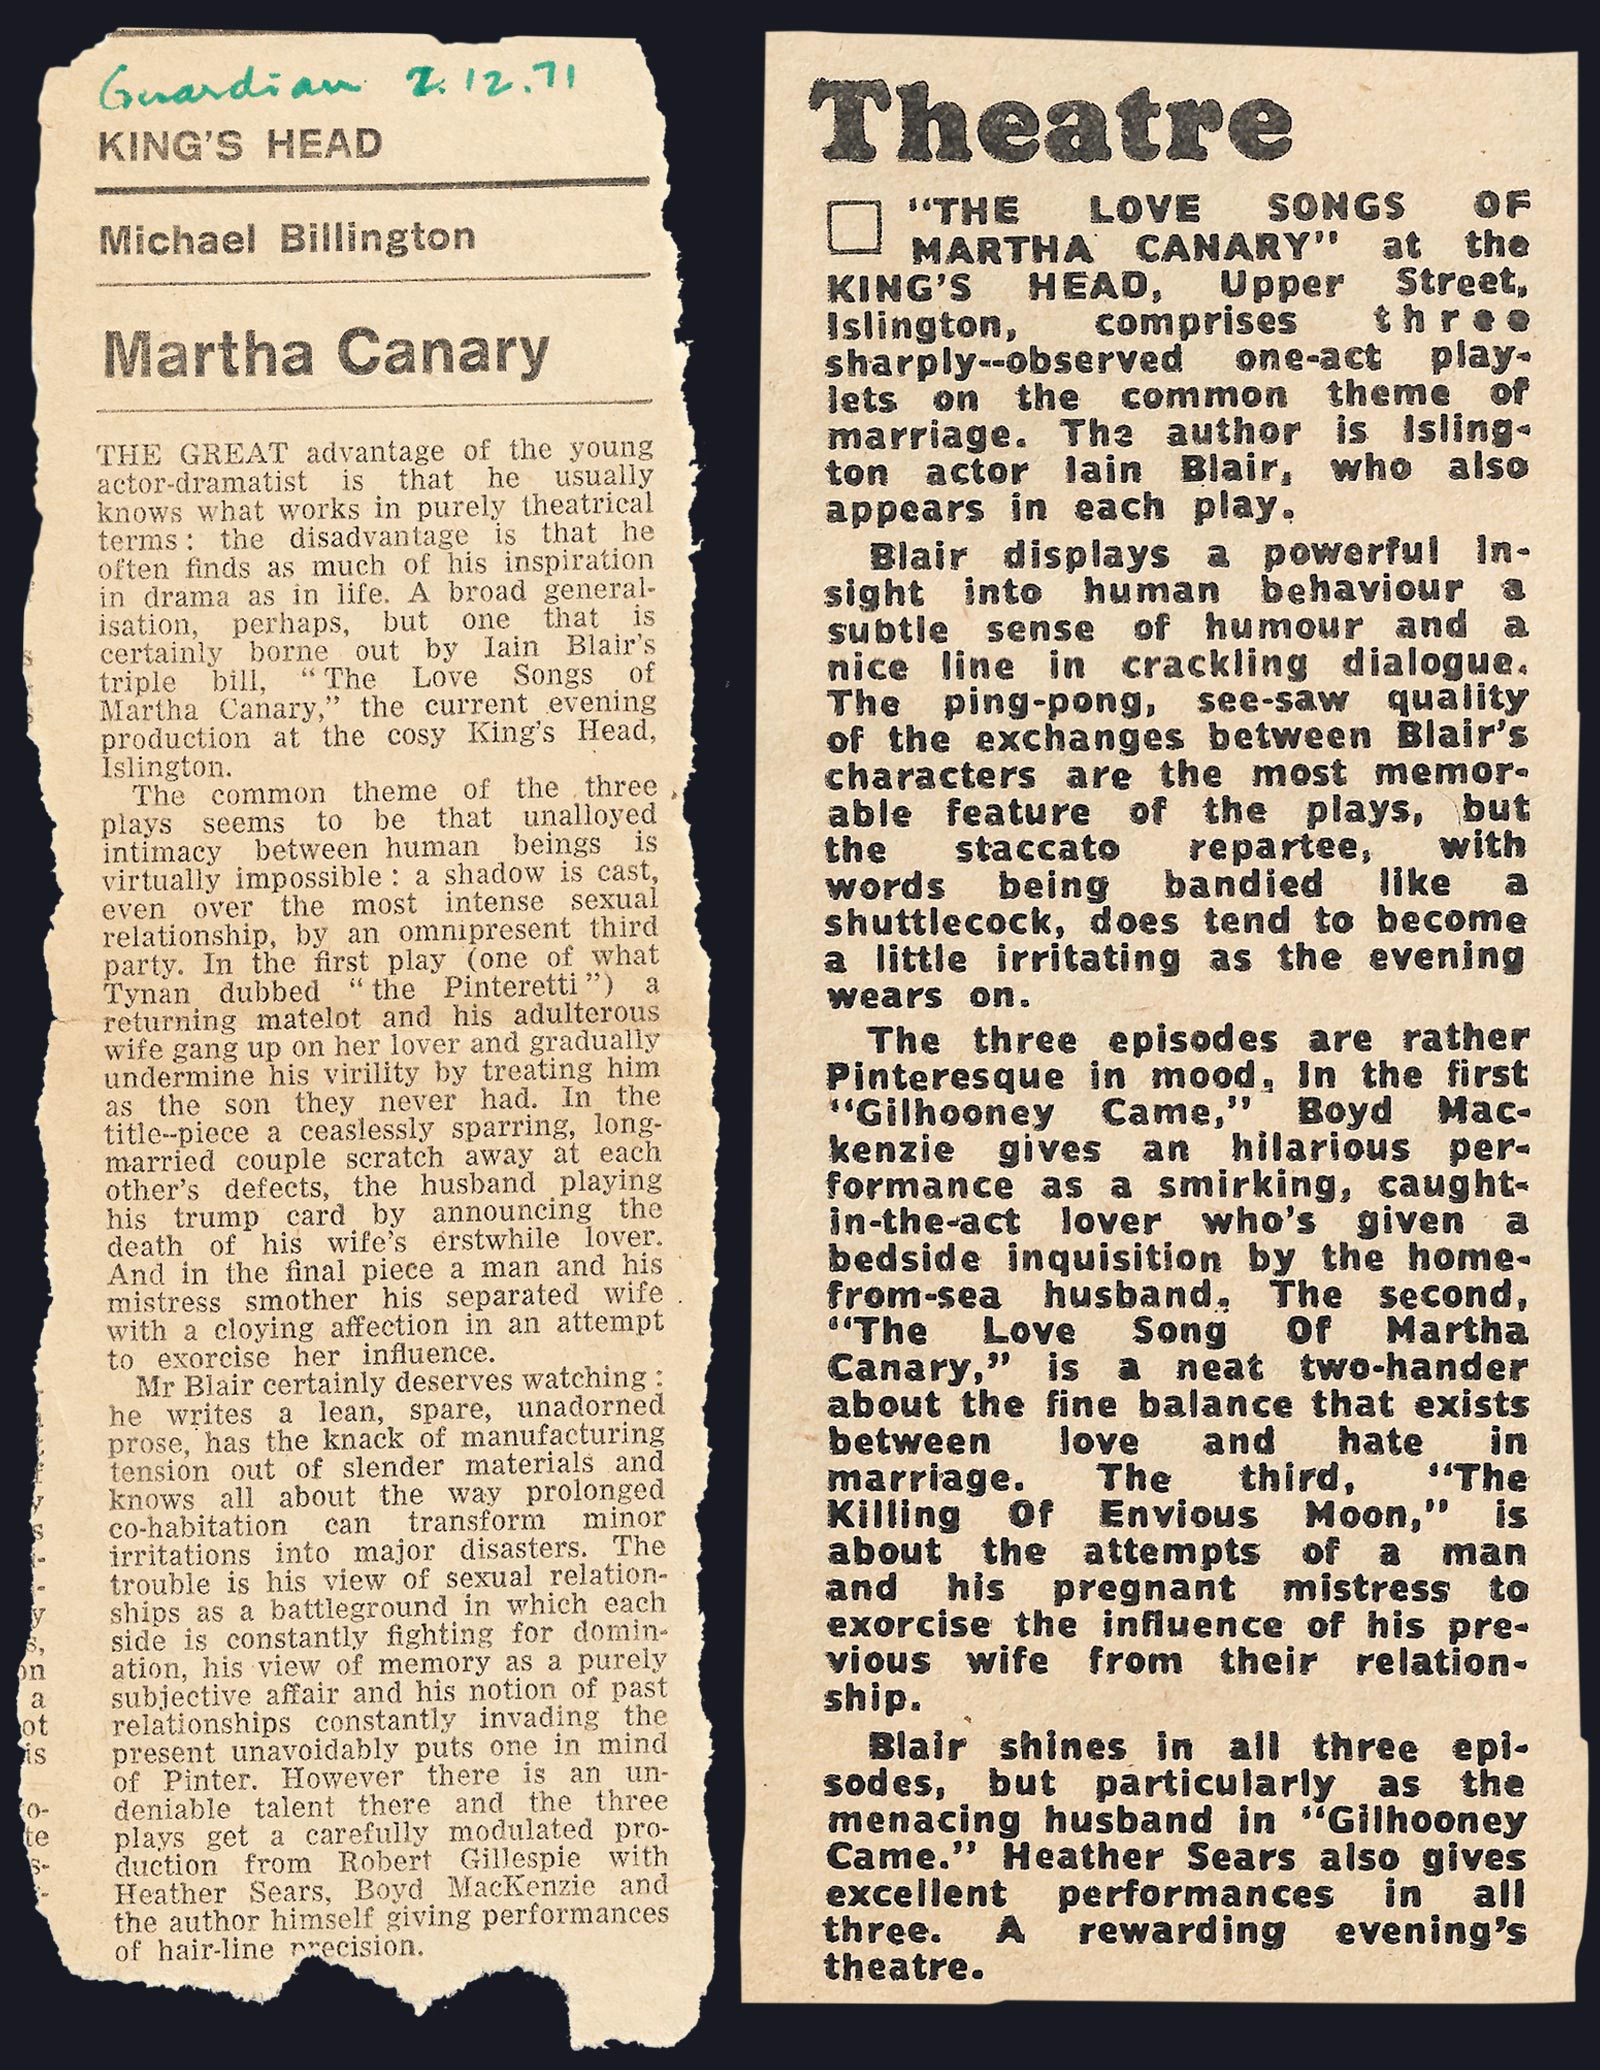 The Love Songs of Martha Canary, King's Head Theatre Islington press review